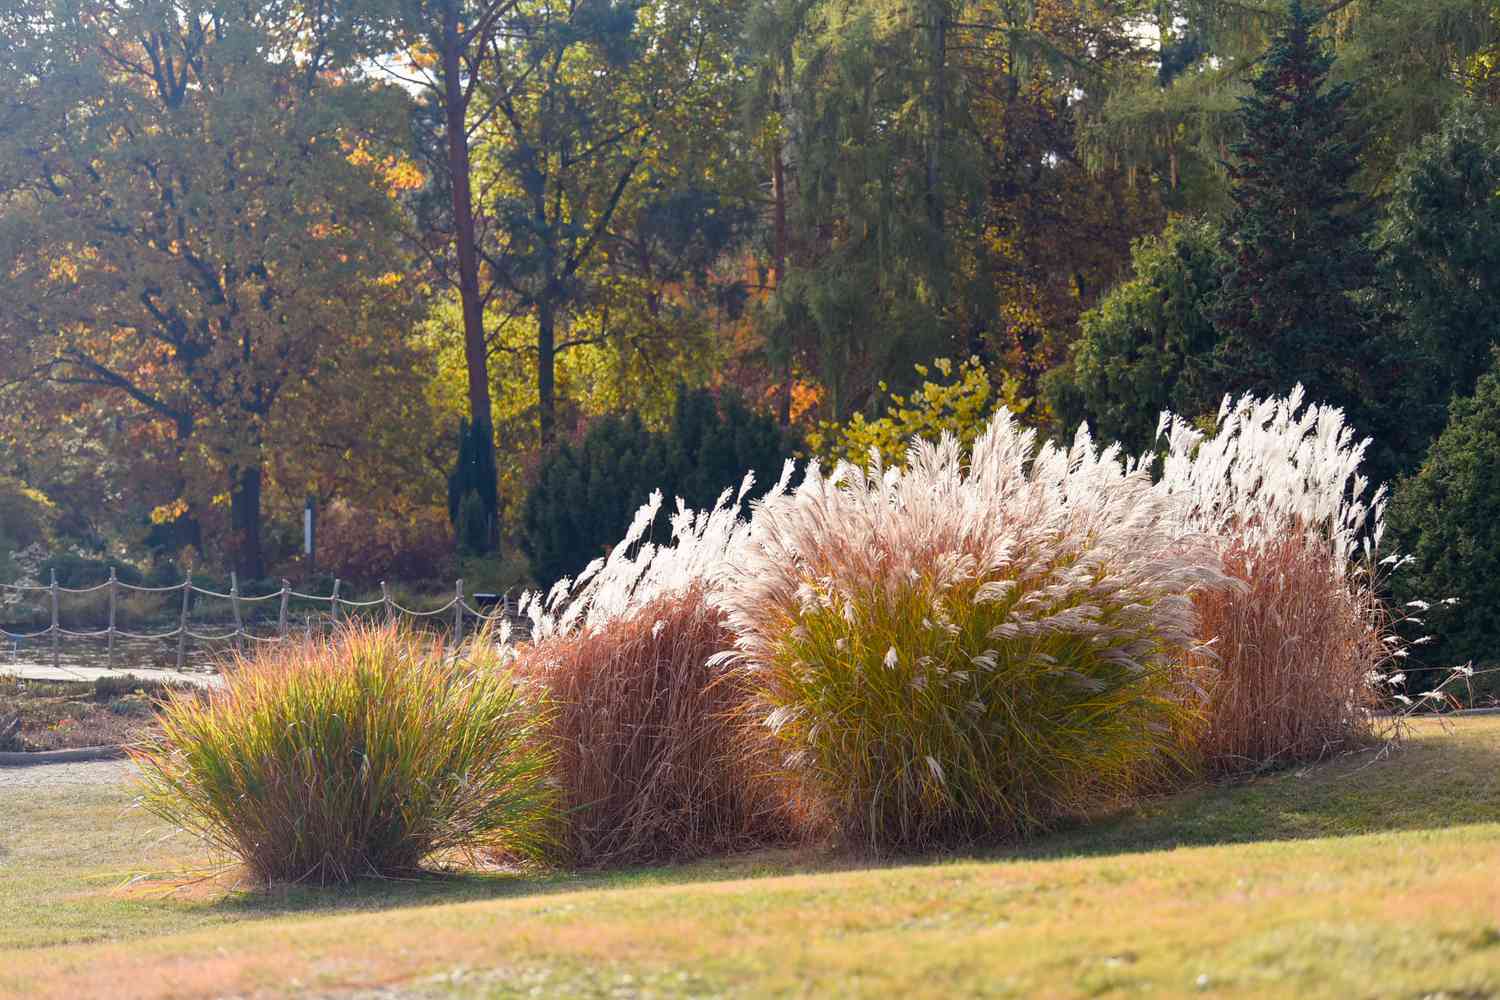 Silvergrasses clustered in middle of lawn with white feathery plumes